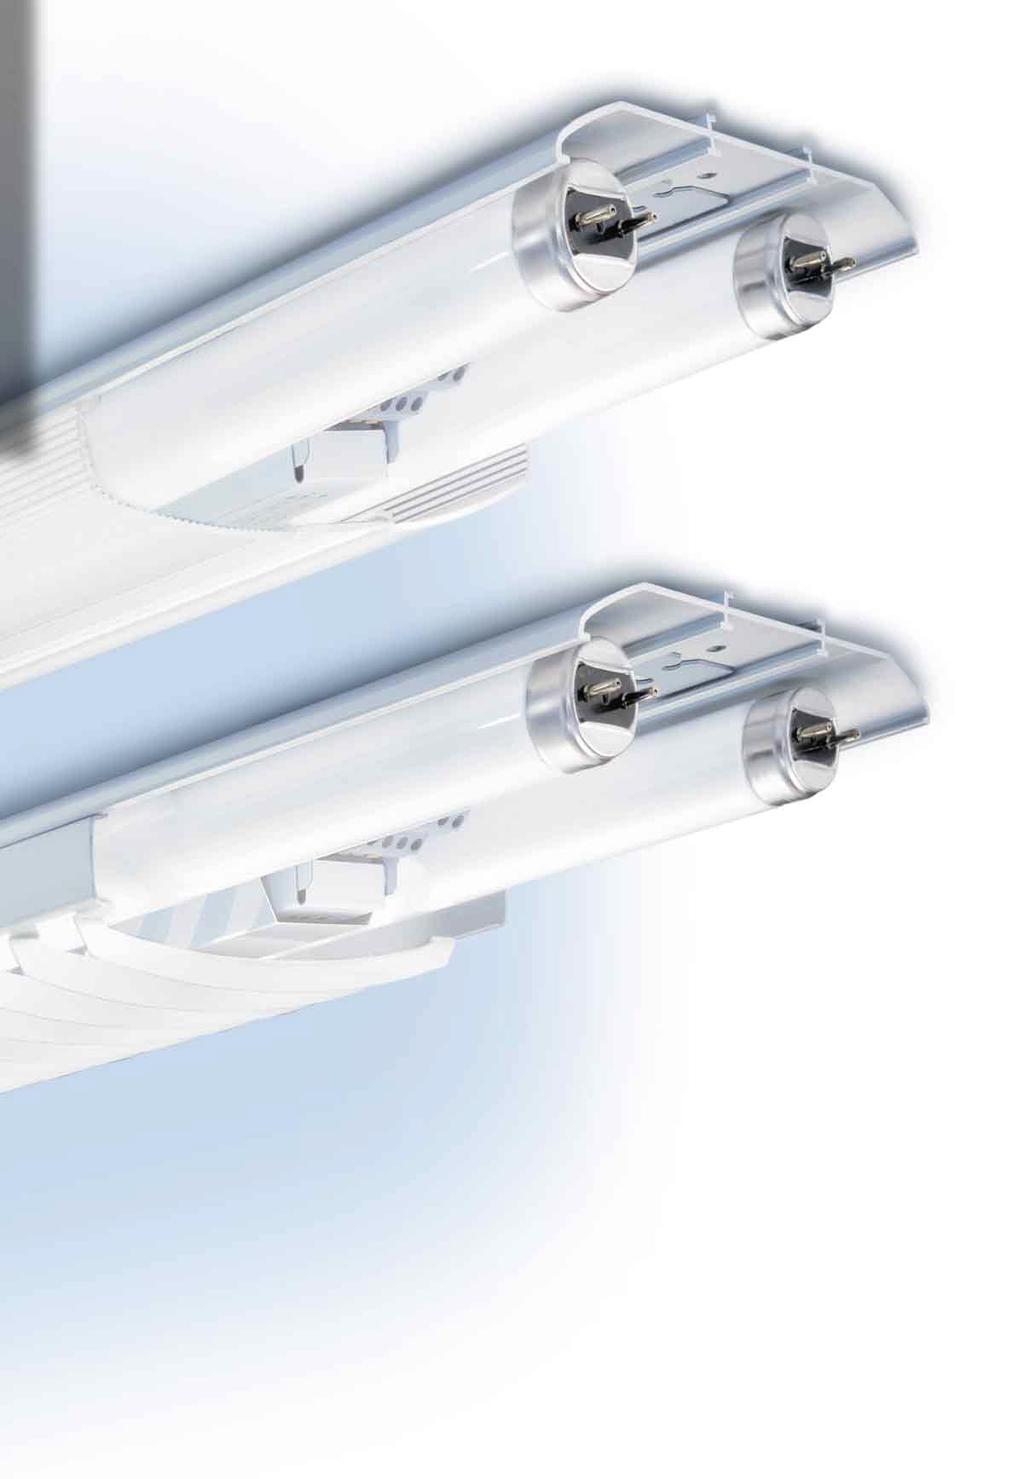 A bright idea: innovative LUMILUX lamps LUMILUX DUO luminaires are equipped with LUMILUX fluorescent lamps in light colour 830 Warm White.